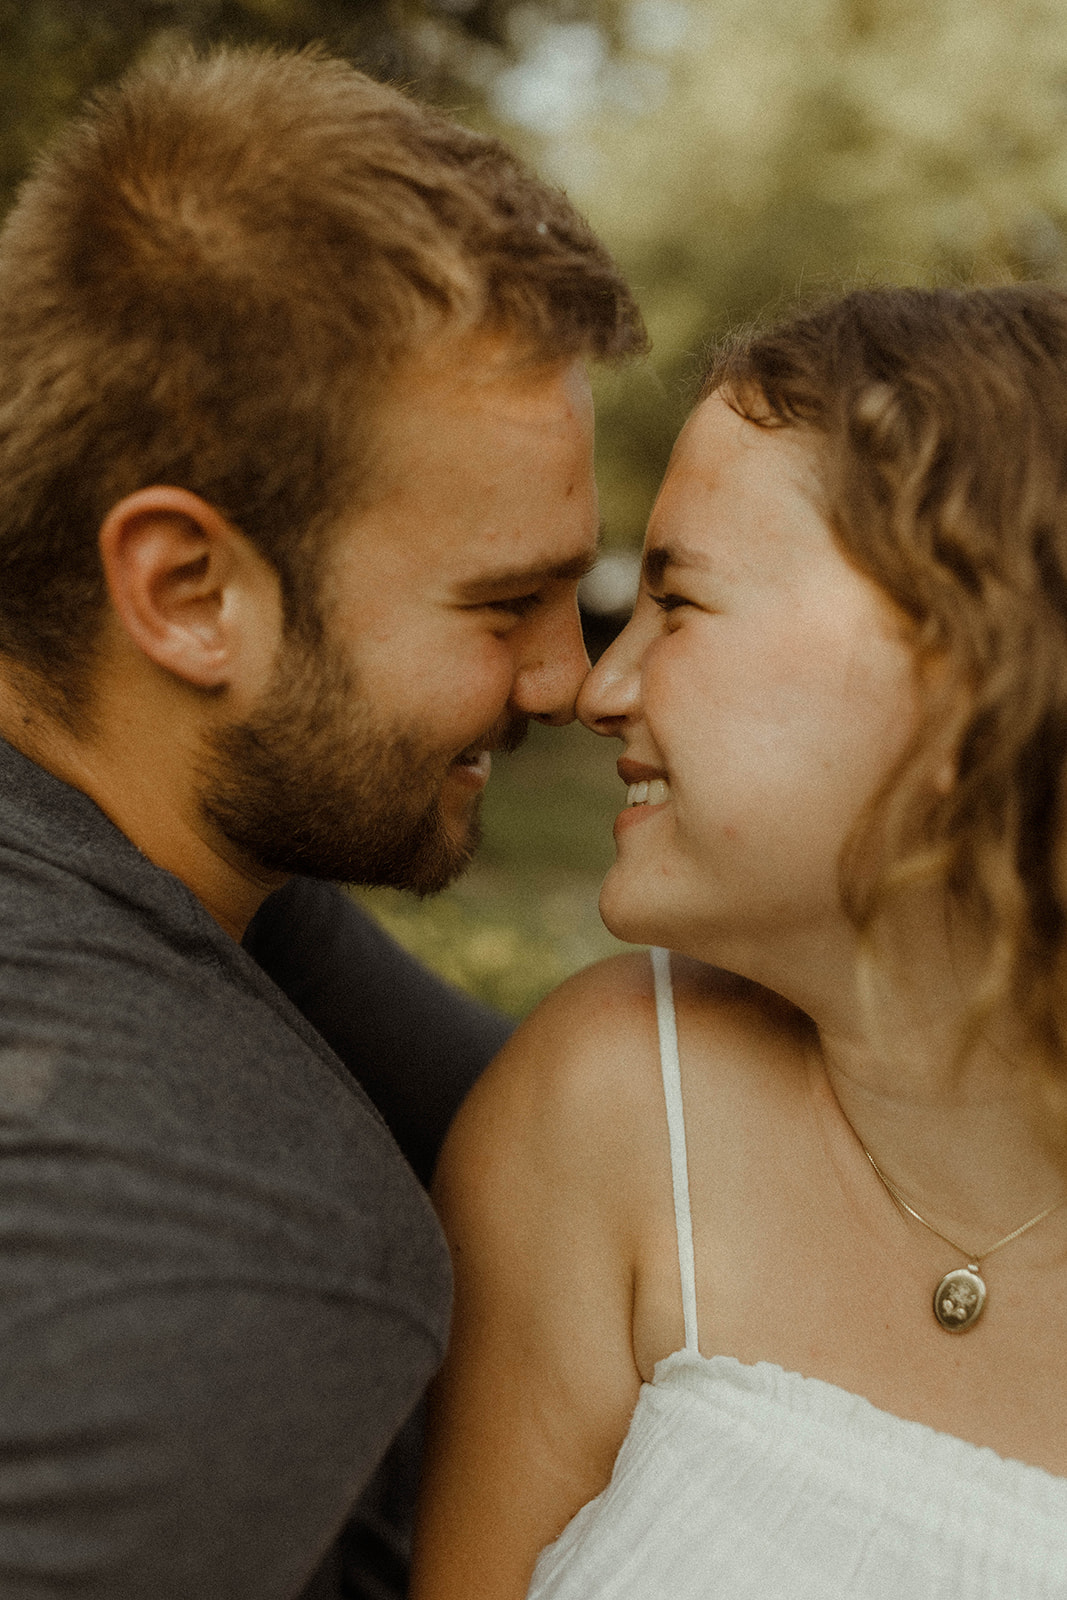 Intimate and romantic couples photo shoot in Upstate New York.